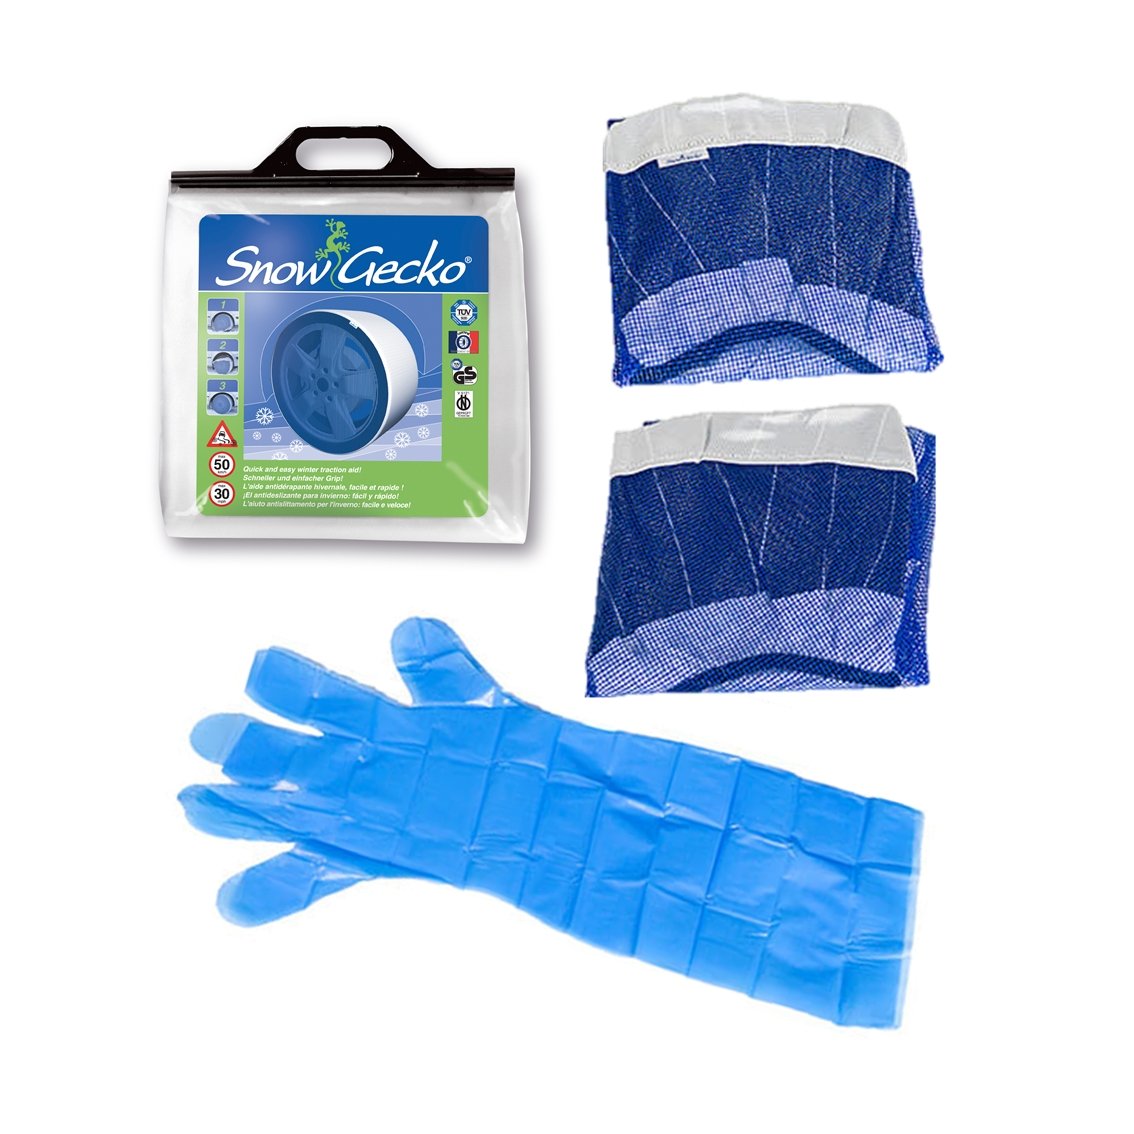 SnowGecko XXL bag includes a pair of tire socks and gloves